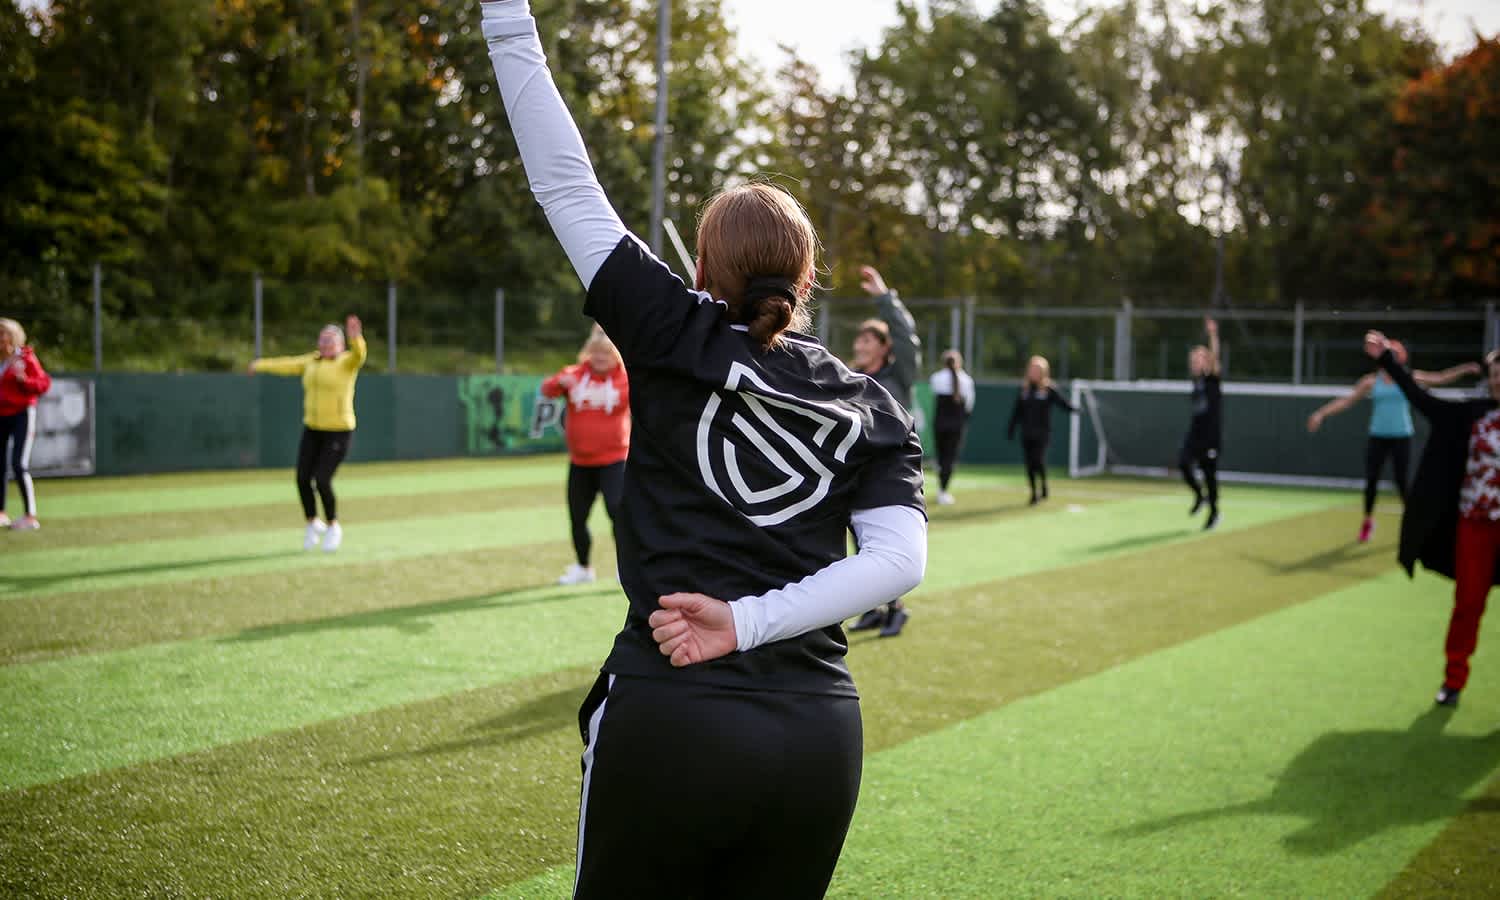 Since 2009 Street Soccer Scotland have supported 25,000 people to create positive change in their lives.